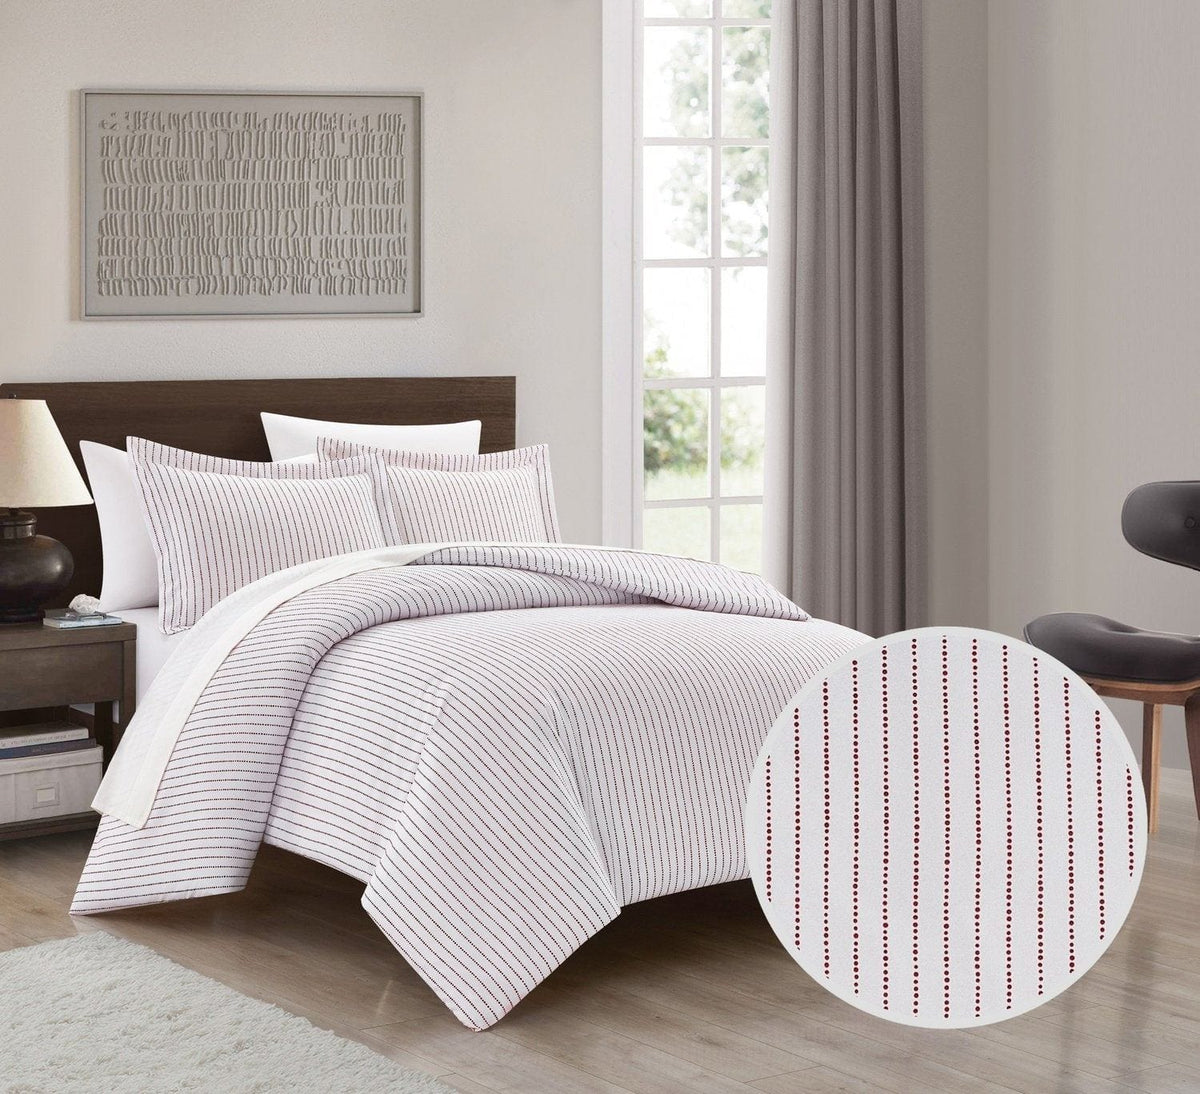 Chic Home Wesley 3 Piece Striped Duvet Cover Set 